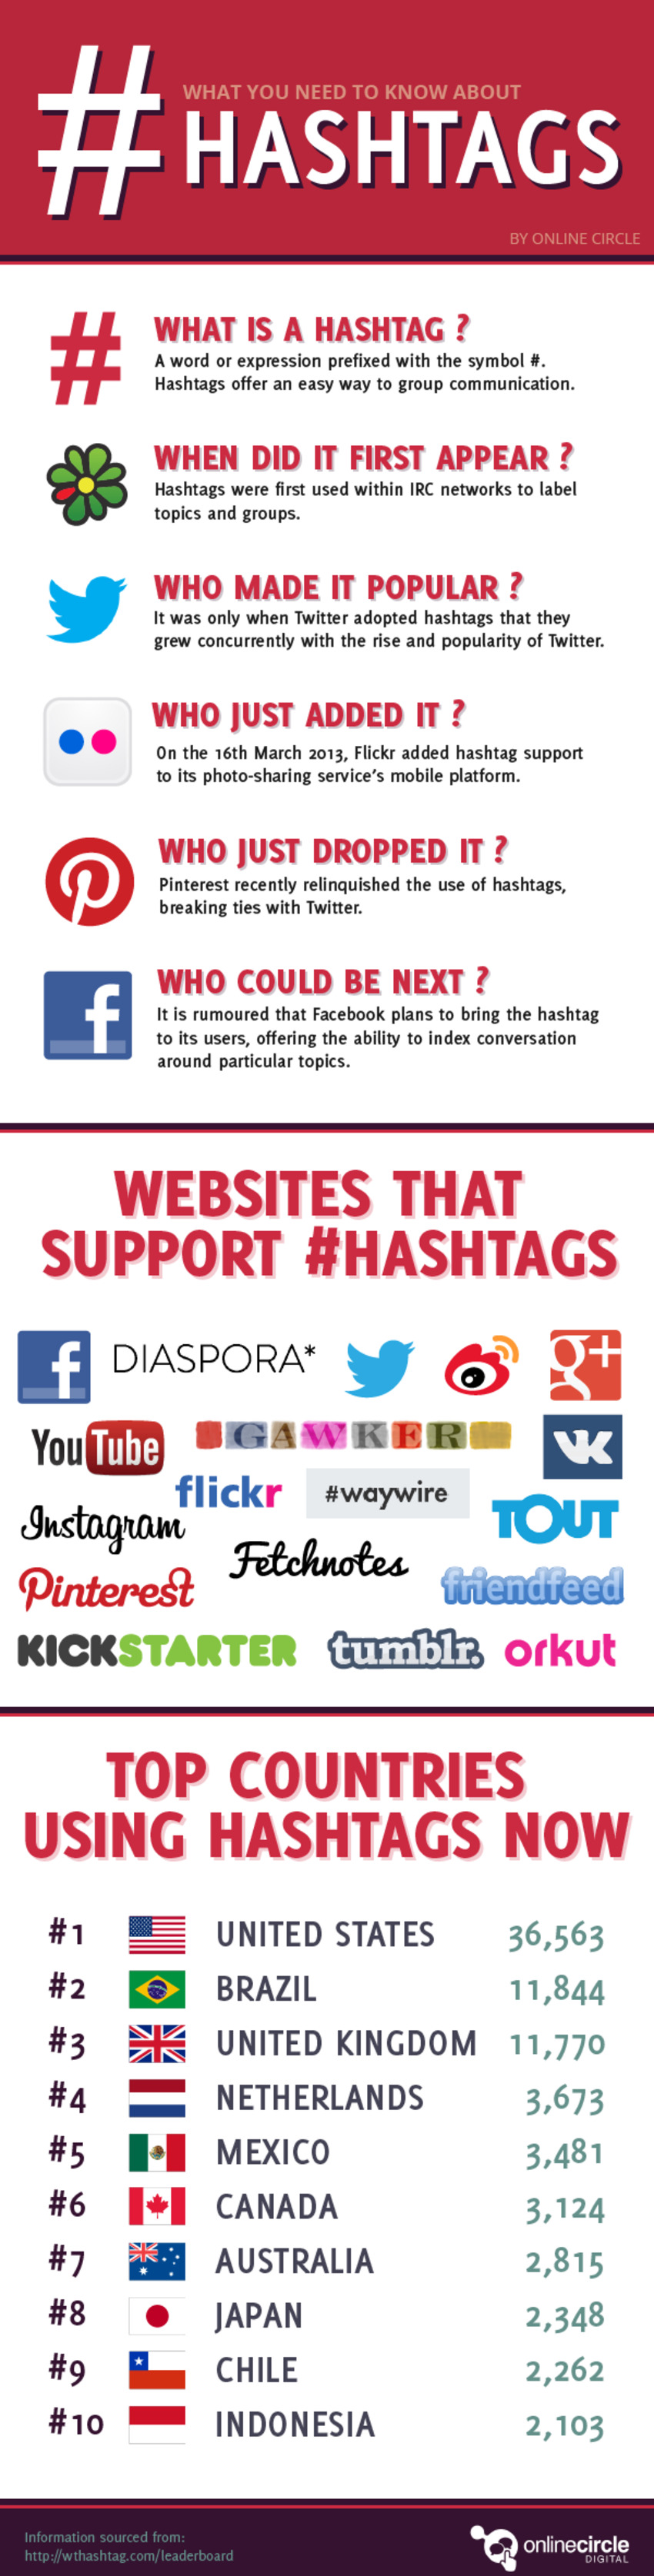 Infographic: The #Hashtag Guide - Marketing Technology Blog | The MarTech Digest | Scoop.it